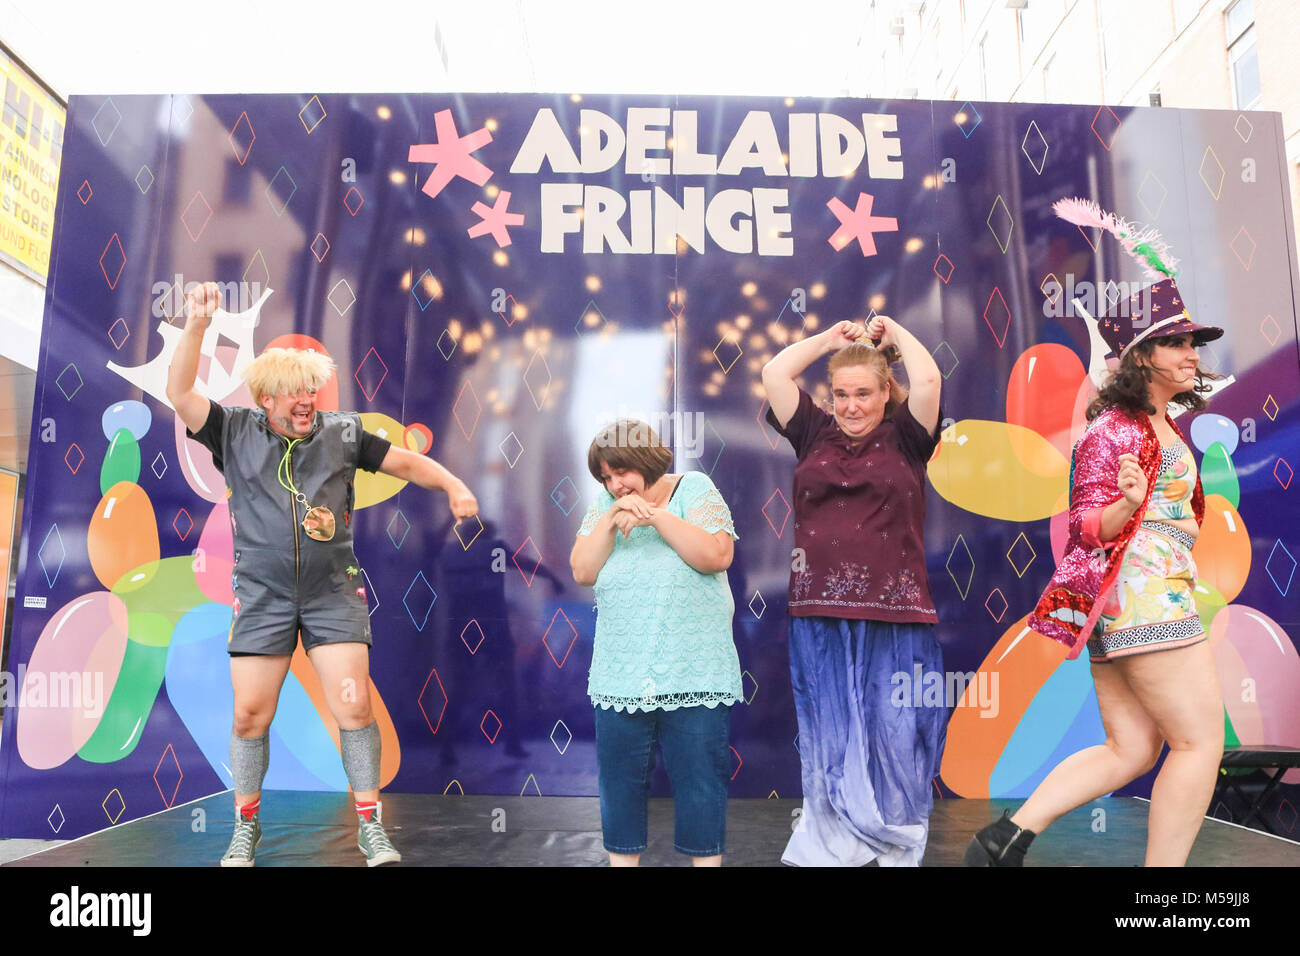 Adelaide Australia. 21st February 2018. Austrian artist Peter Baeker performs  his ' Personal 80's' on stage as a preview in front of members of the public at Rundle Mall Adelaide. The Adelaide Fringe is the world's second-largest annual arts festival which runs from 16th February to 18 March featuring  5000 artists from around Australia and the world includes contemporary work in art forms including cabaret, comedy, circus and physical theatre, dance, film, theatre, puppetry, music, visual art, magic, digital and interactive and designCredit: amer ghazzal/Alamy Live News Stock Photo